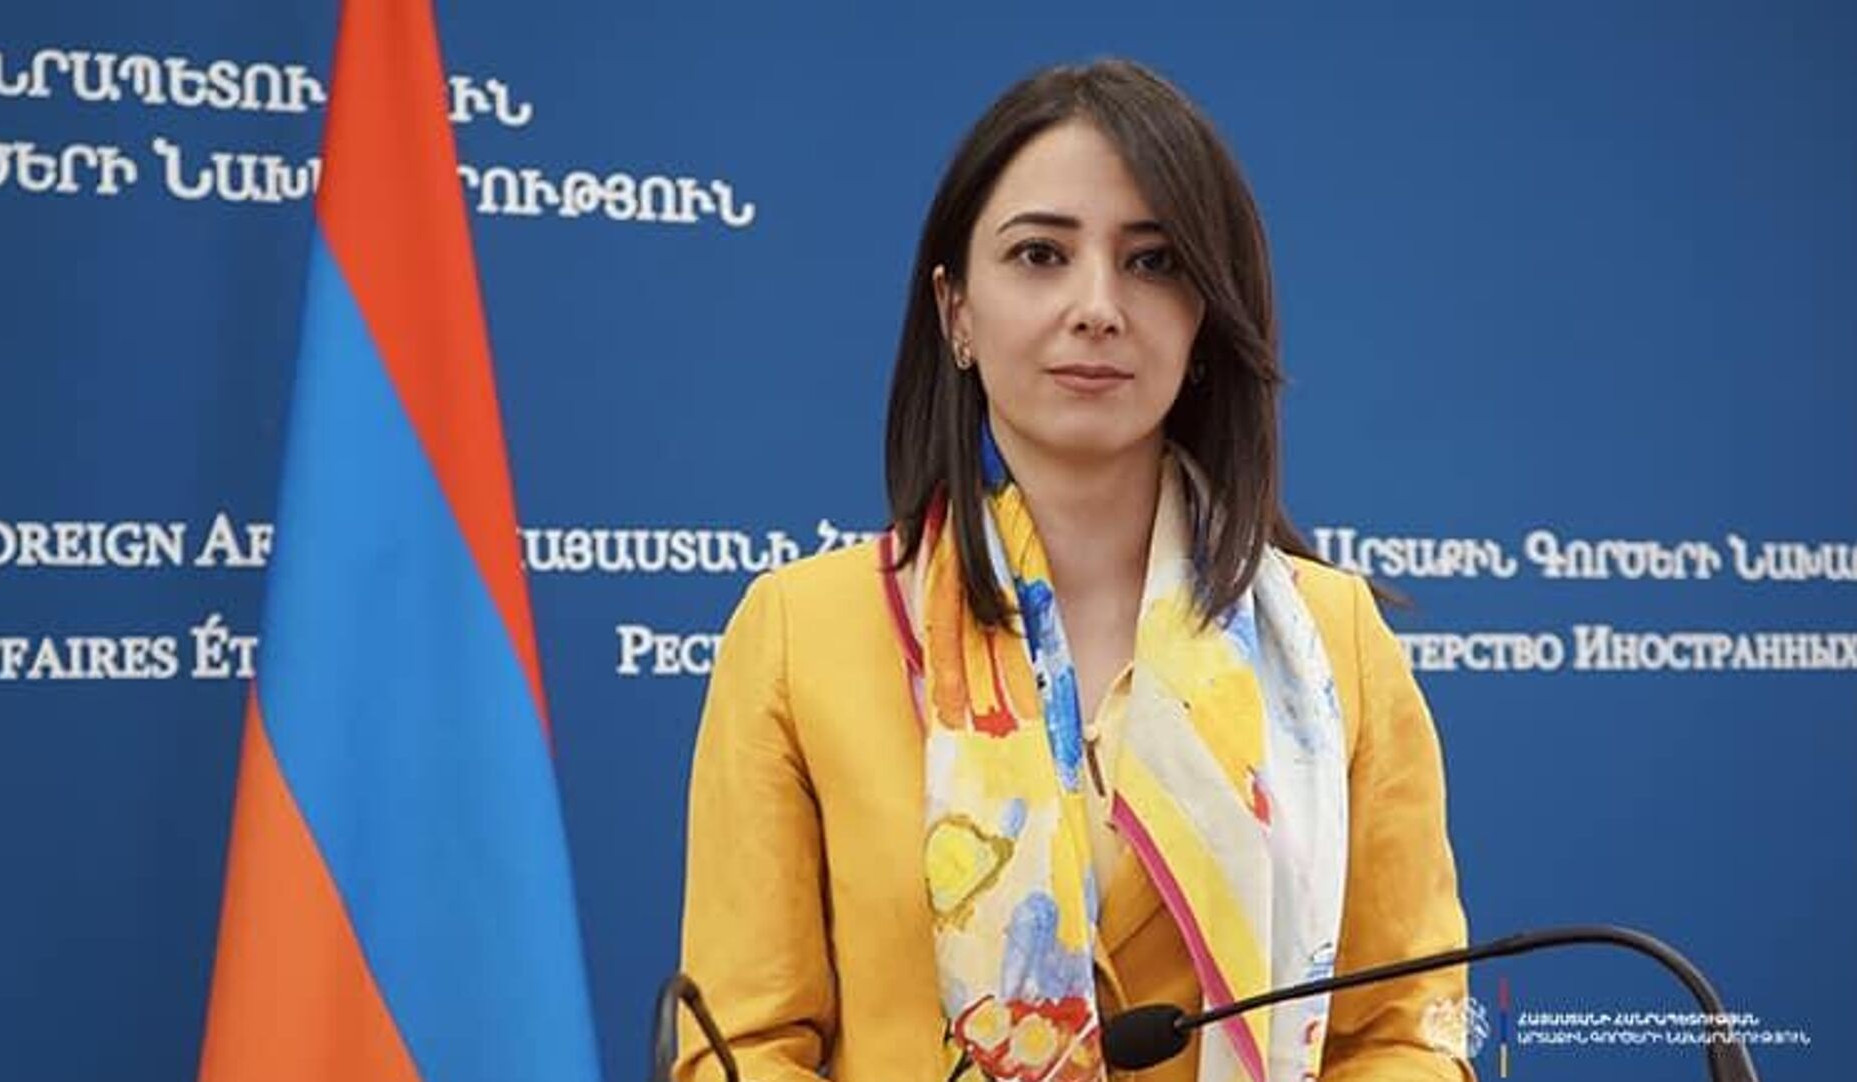 Armenia's Foreign Ministry Spokesperson referred to PACE resolution on Nagorno-Karabakh